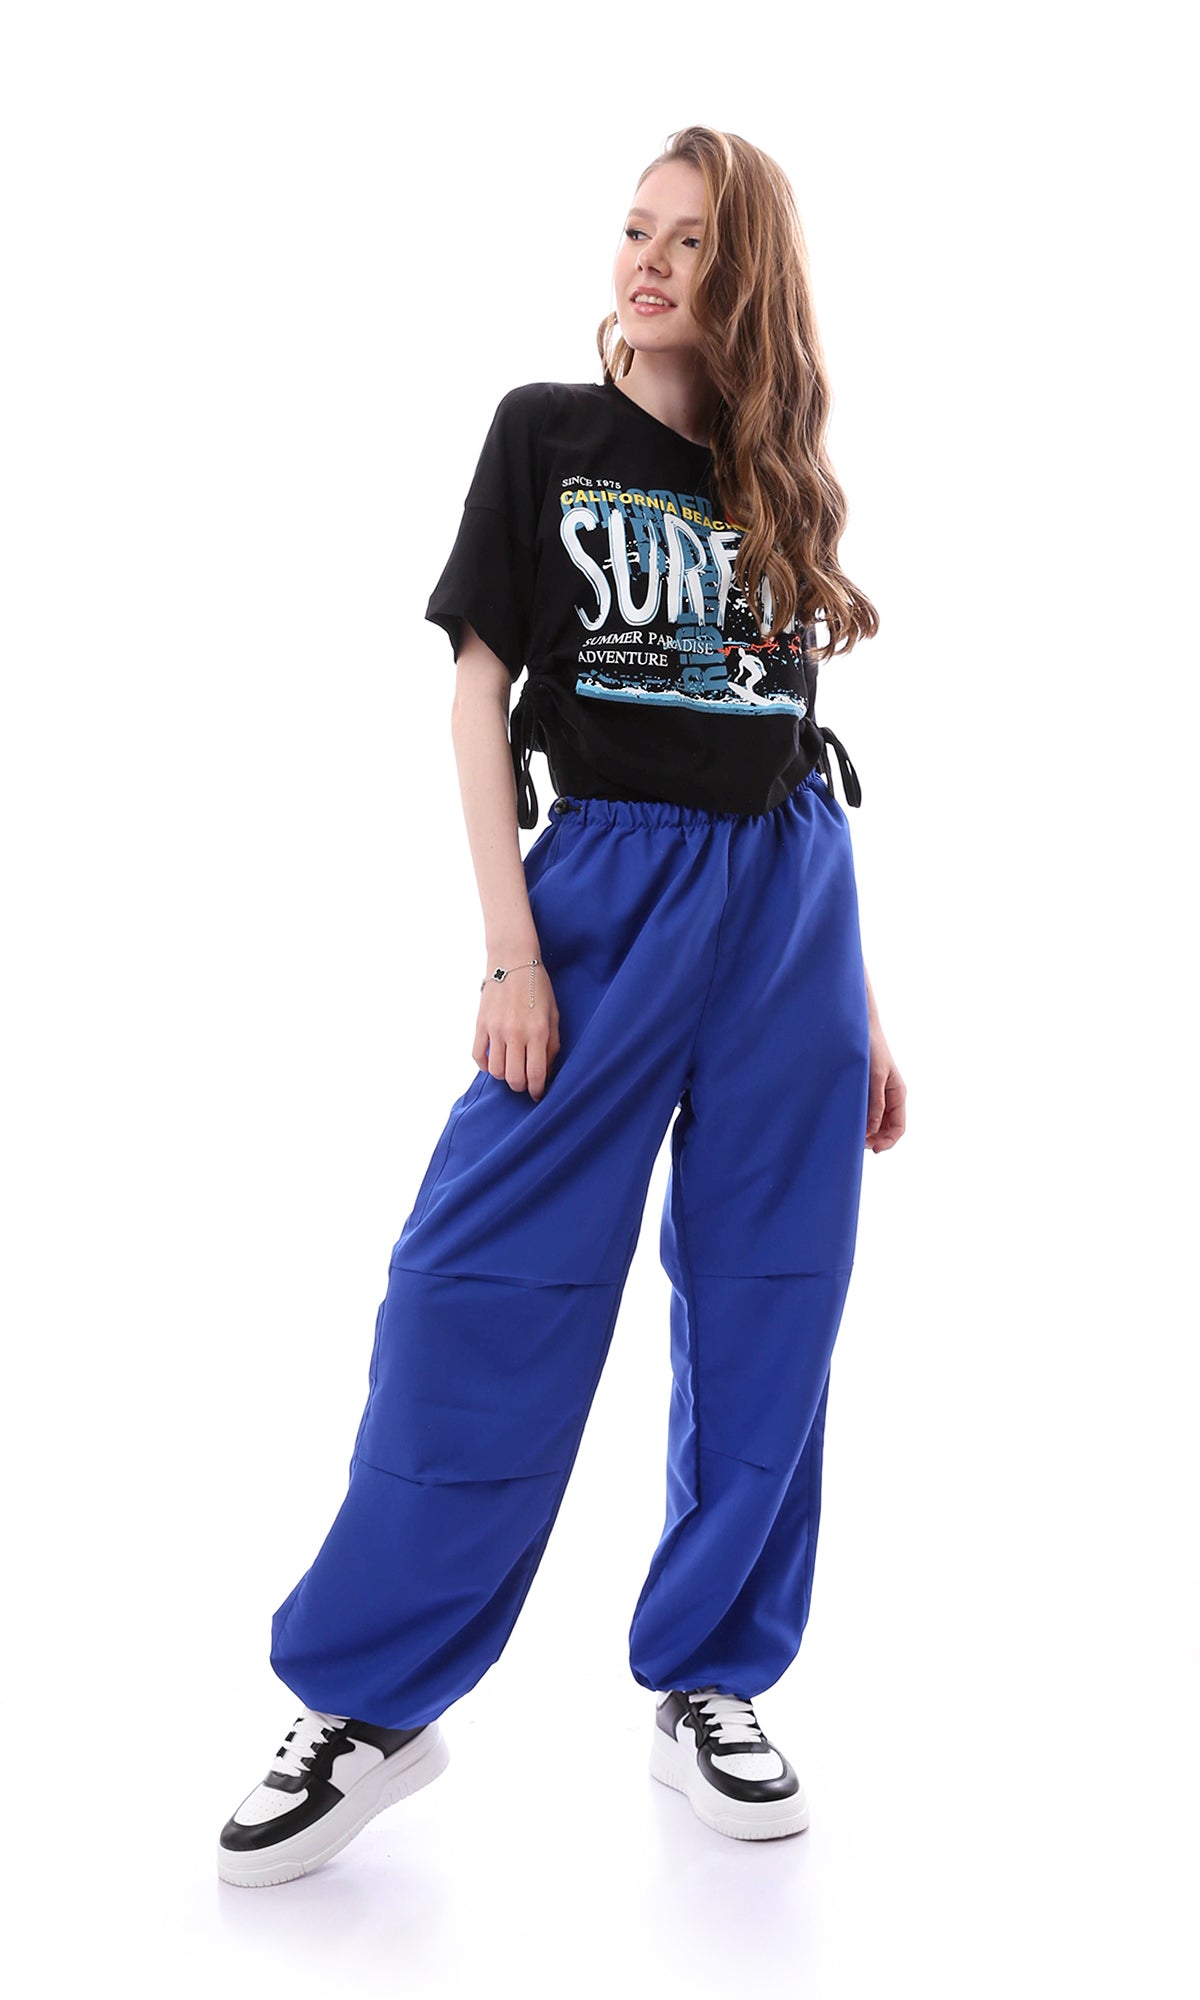 O165475 Black Cropped T-Shirt "Surfing" Printed With Side Drawstring